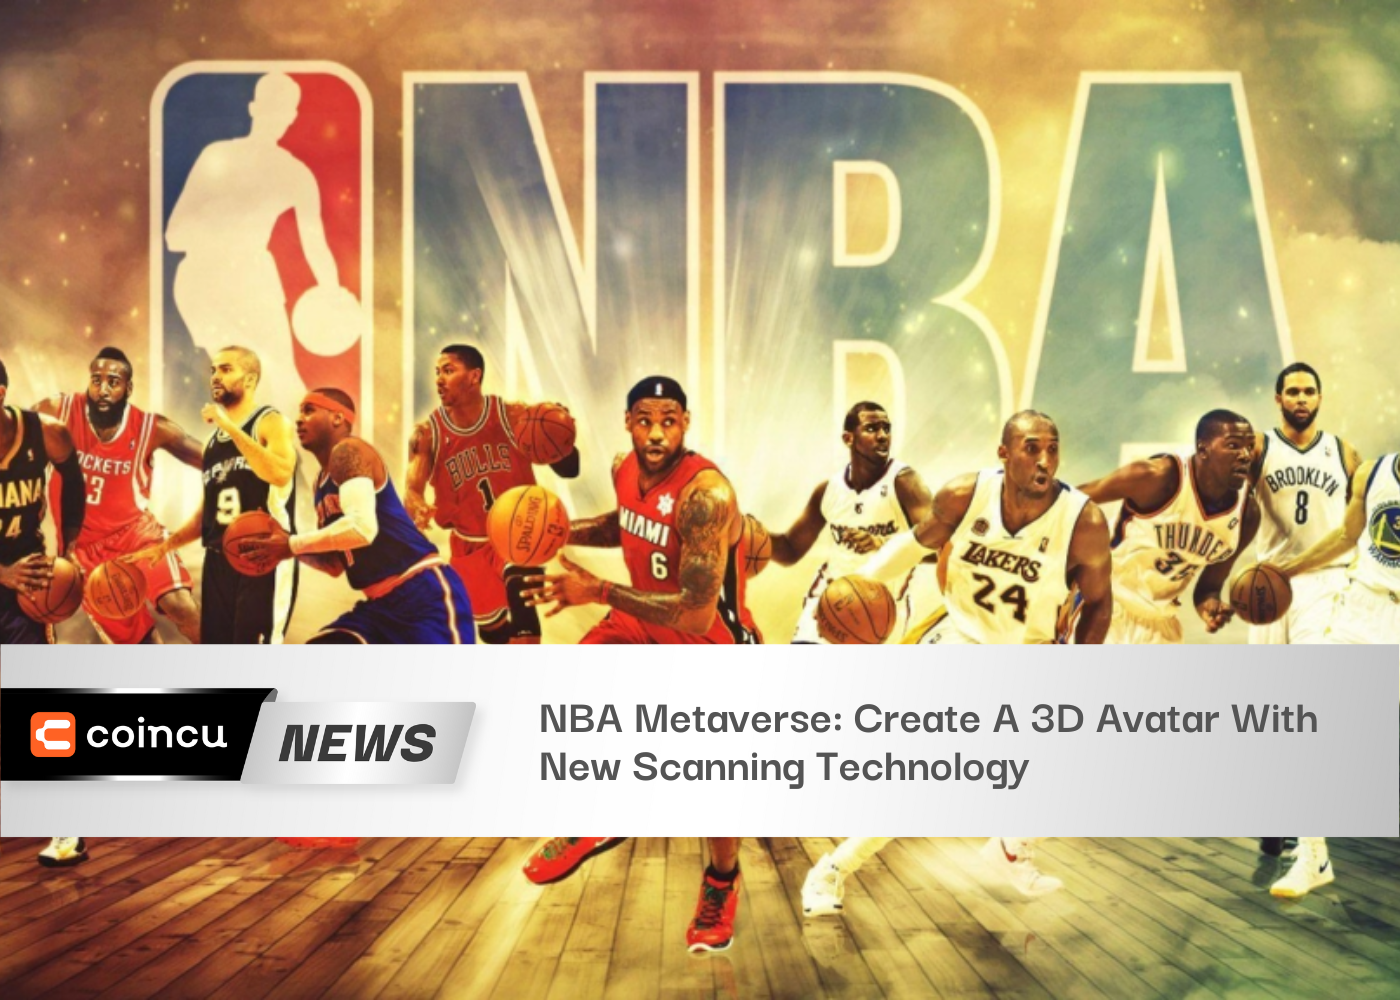 NBA Metaverse: Create A 3D Avatar With New Scanning Technology